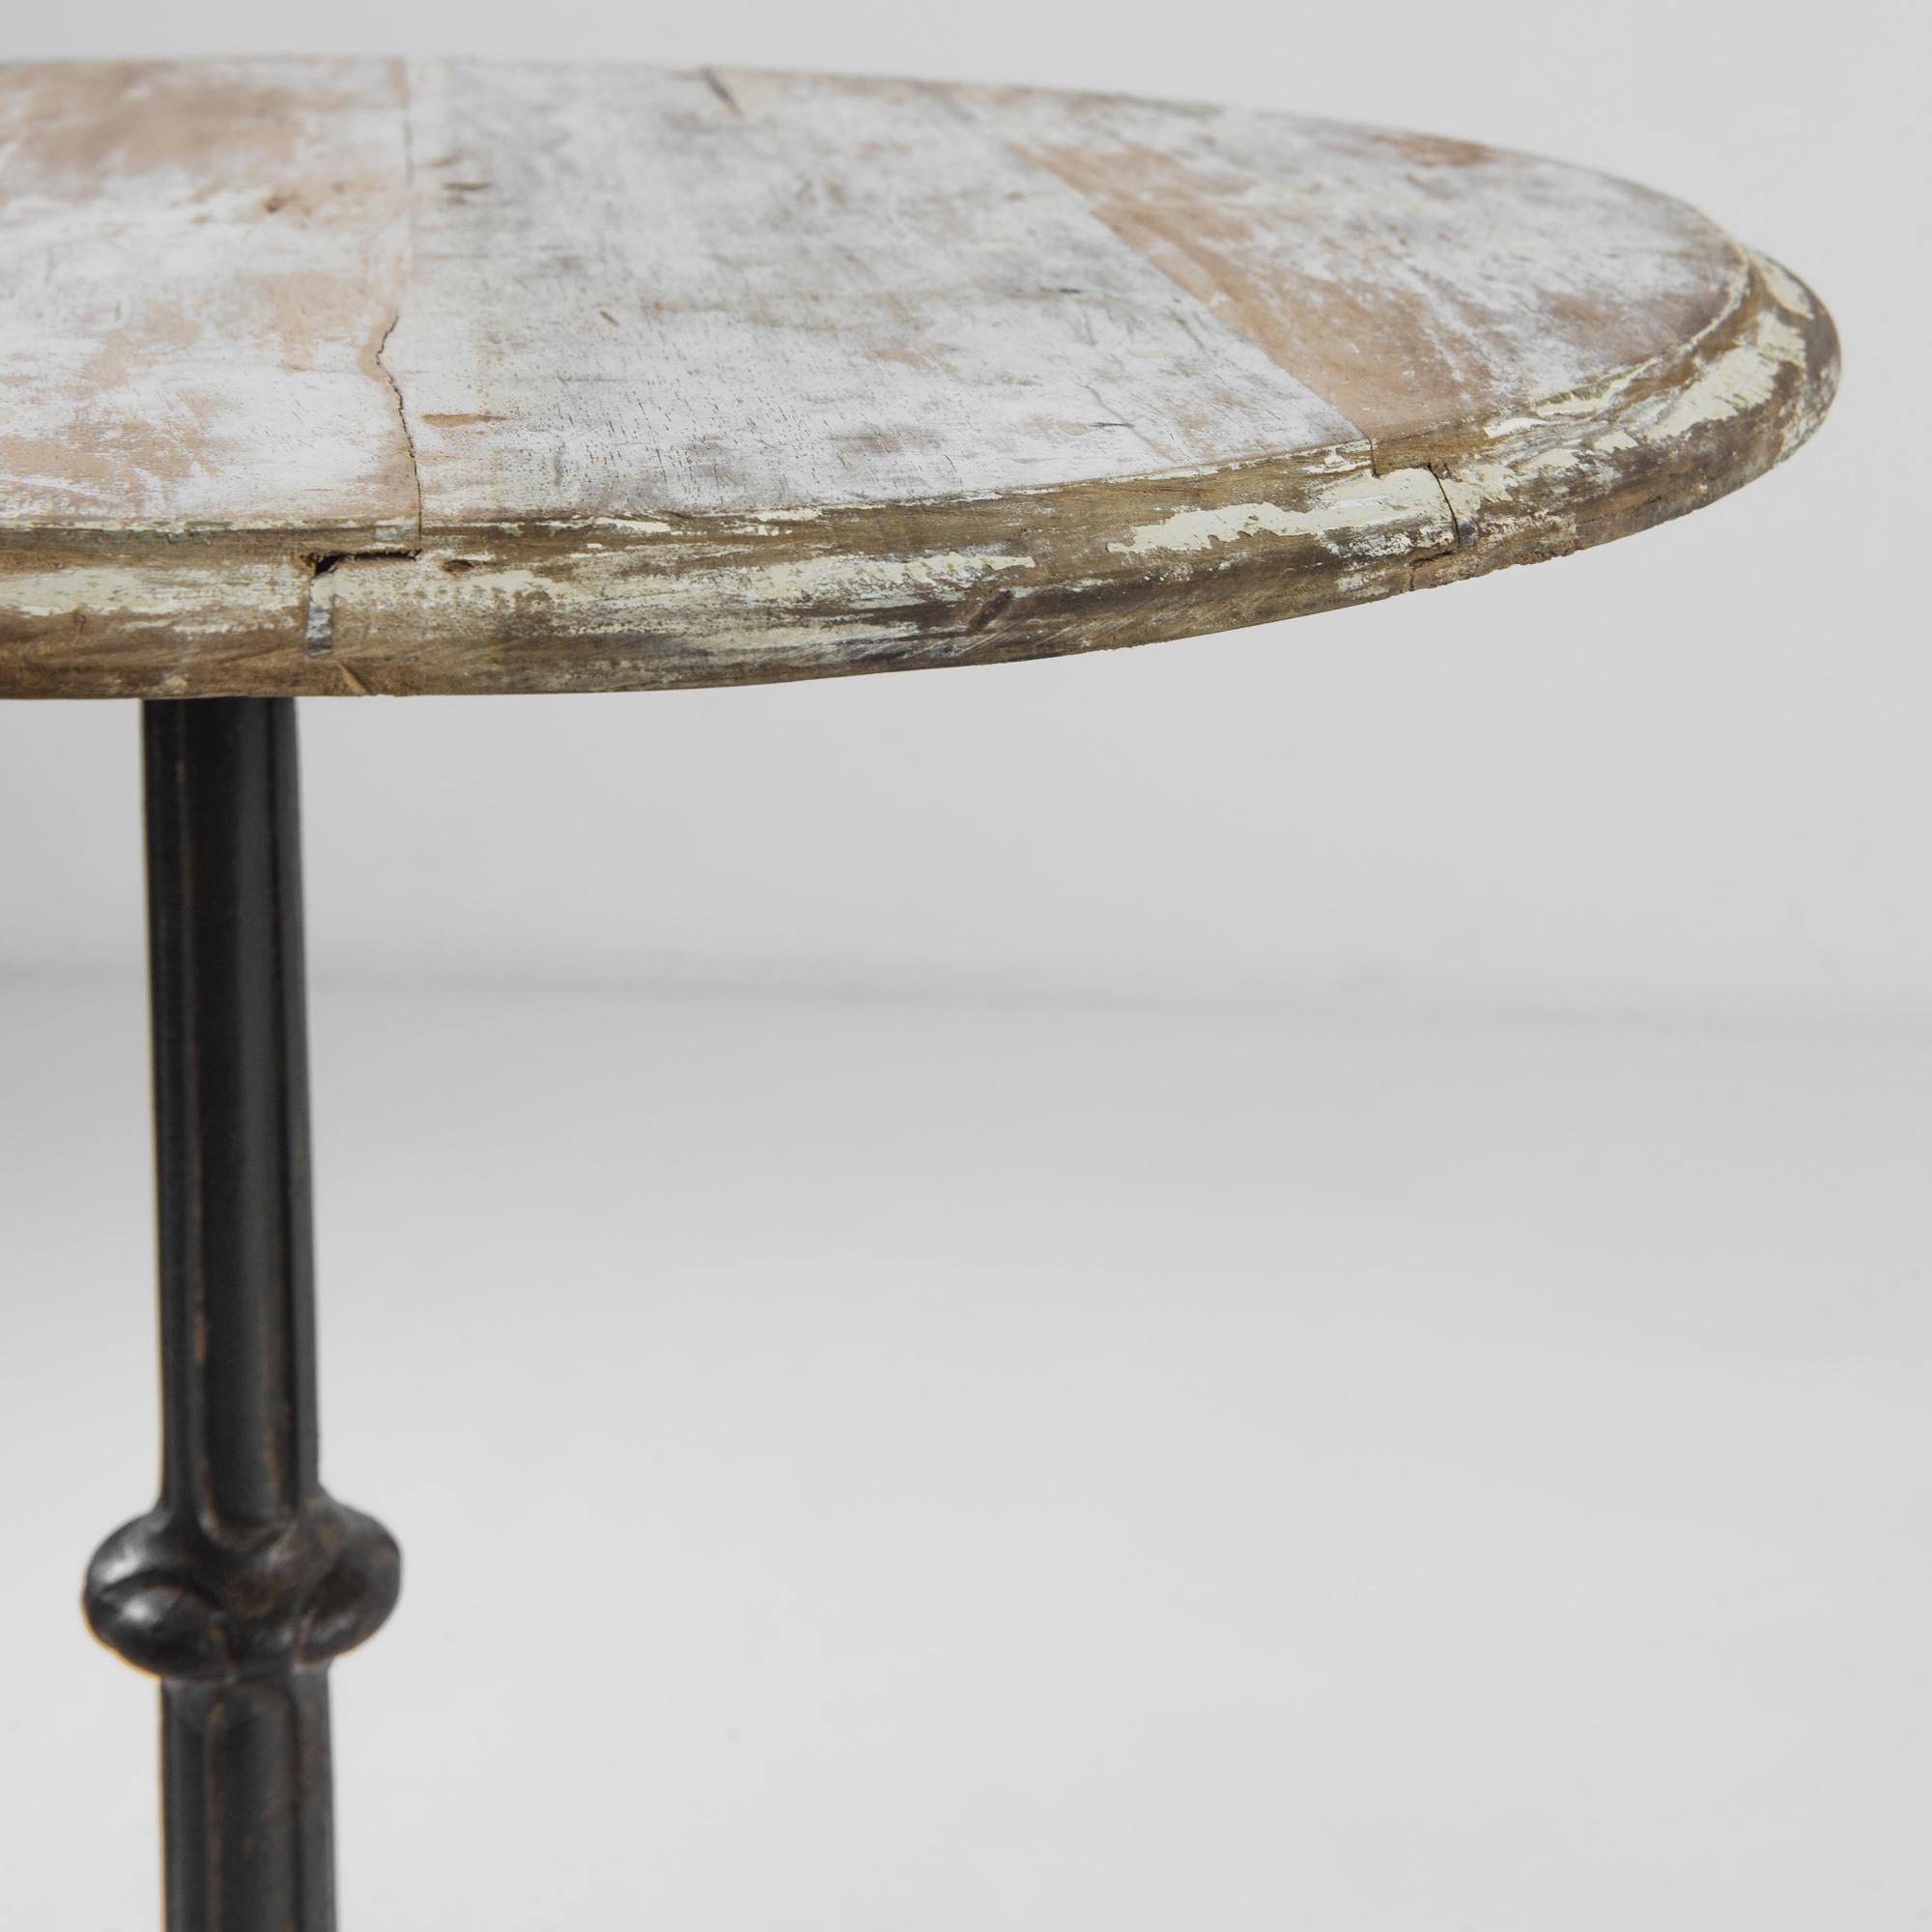 Early 20th Century Turn of the Century French Metal Bistro Table